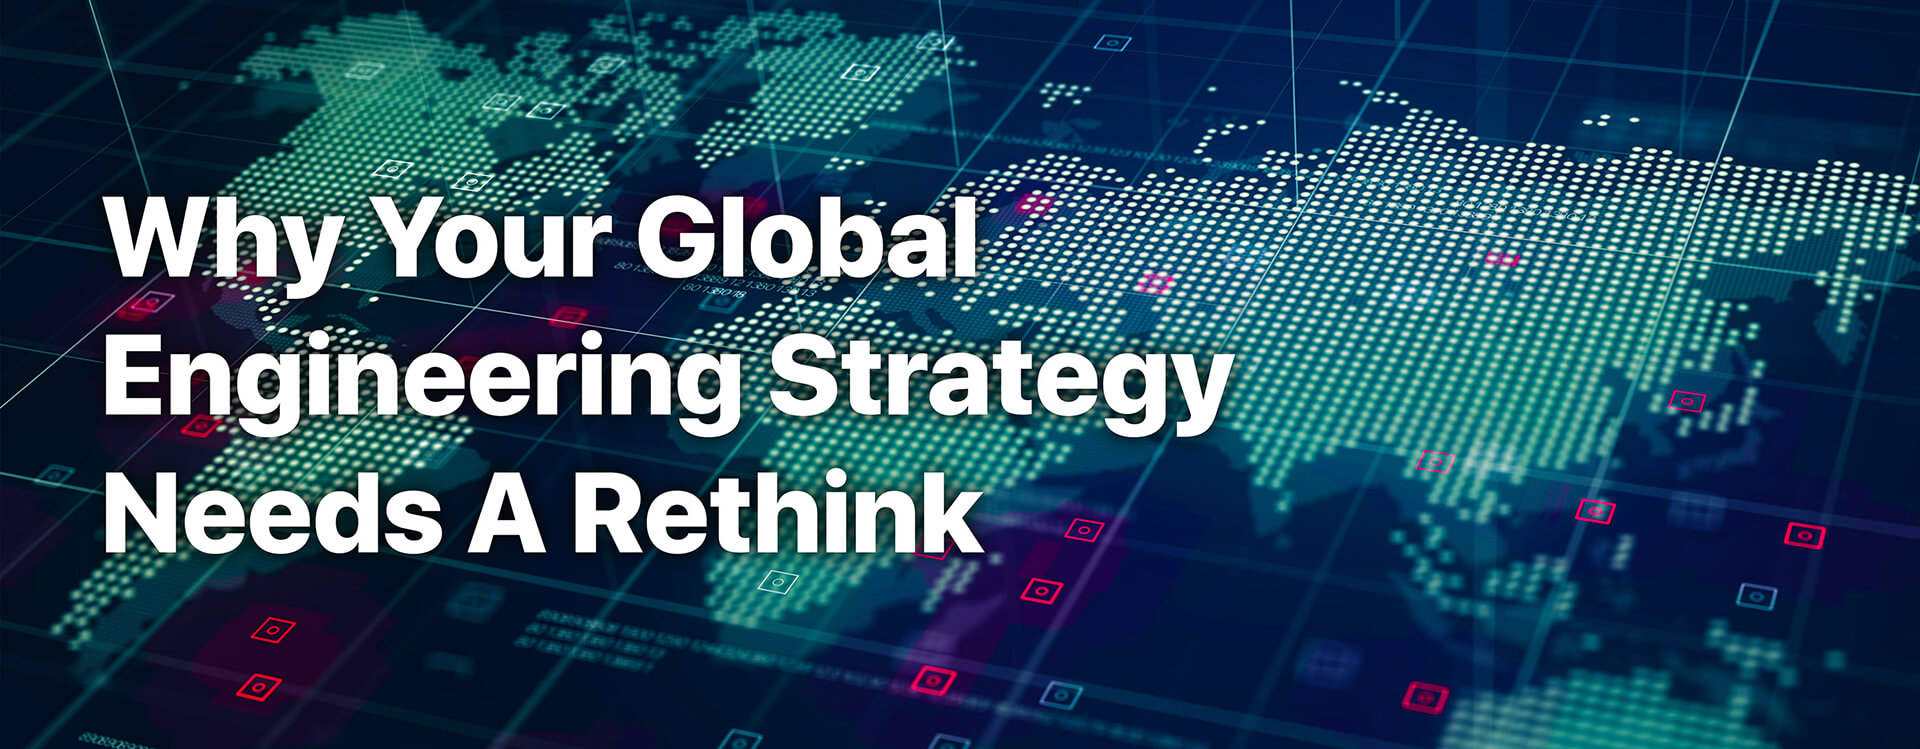 Why your global engineering strategy needs a rethink